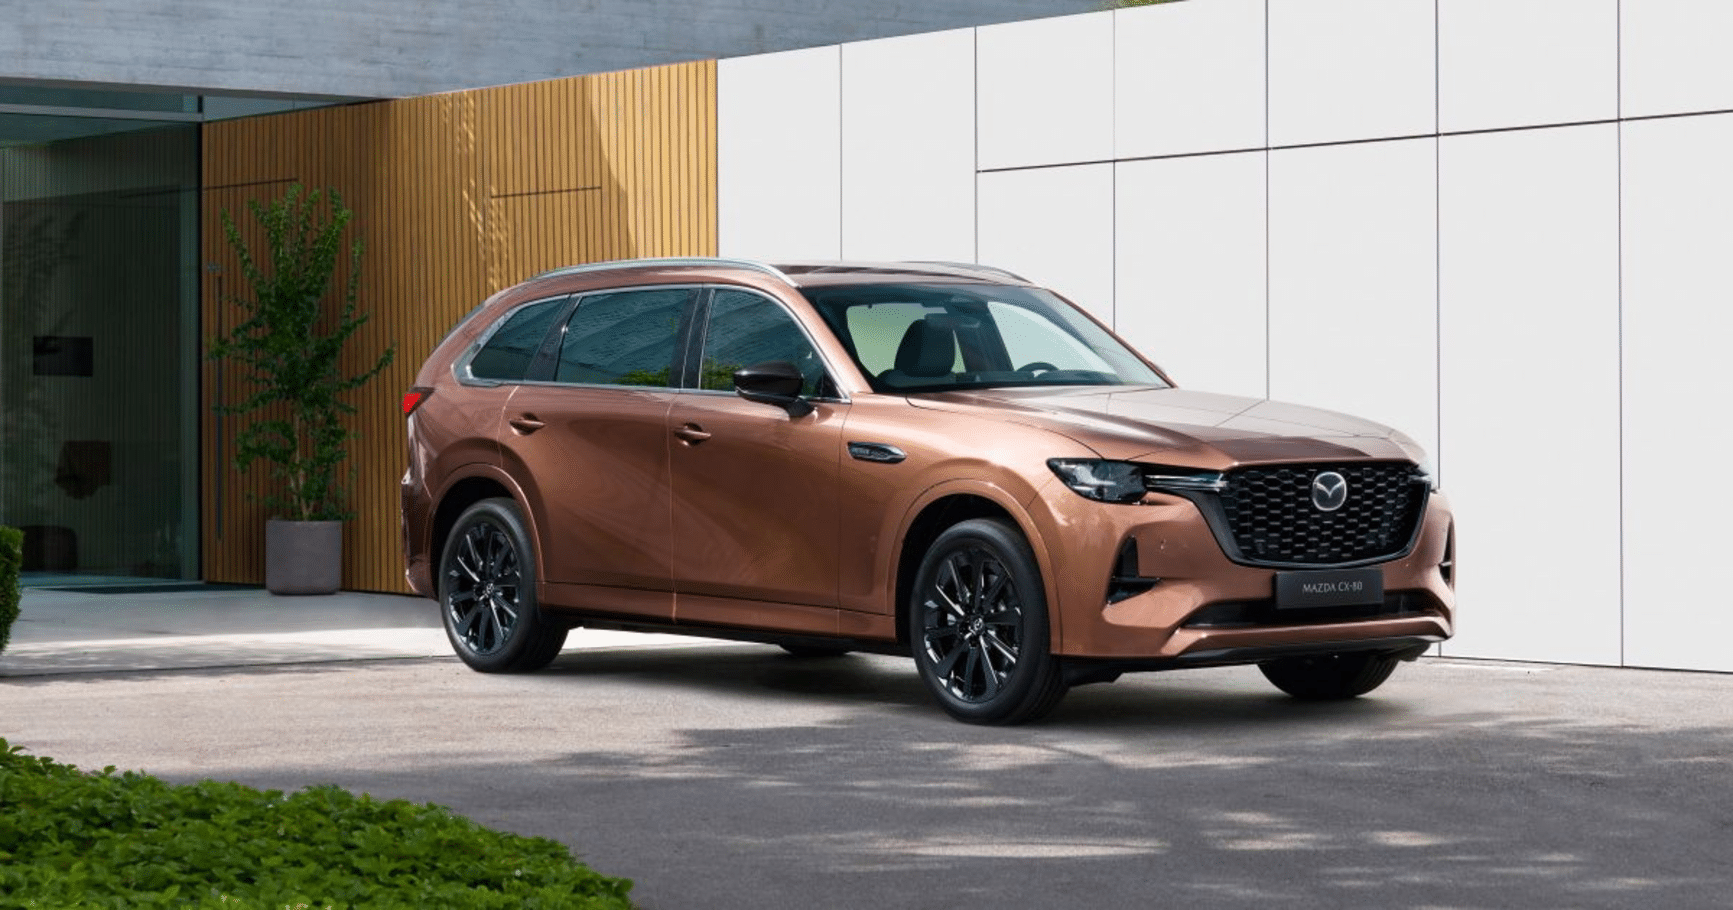 Mazda Unveils New CX-80 SUV in Europe, Australian Arrival Expected Soon